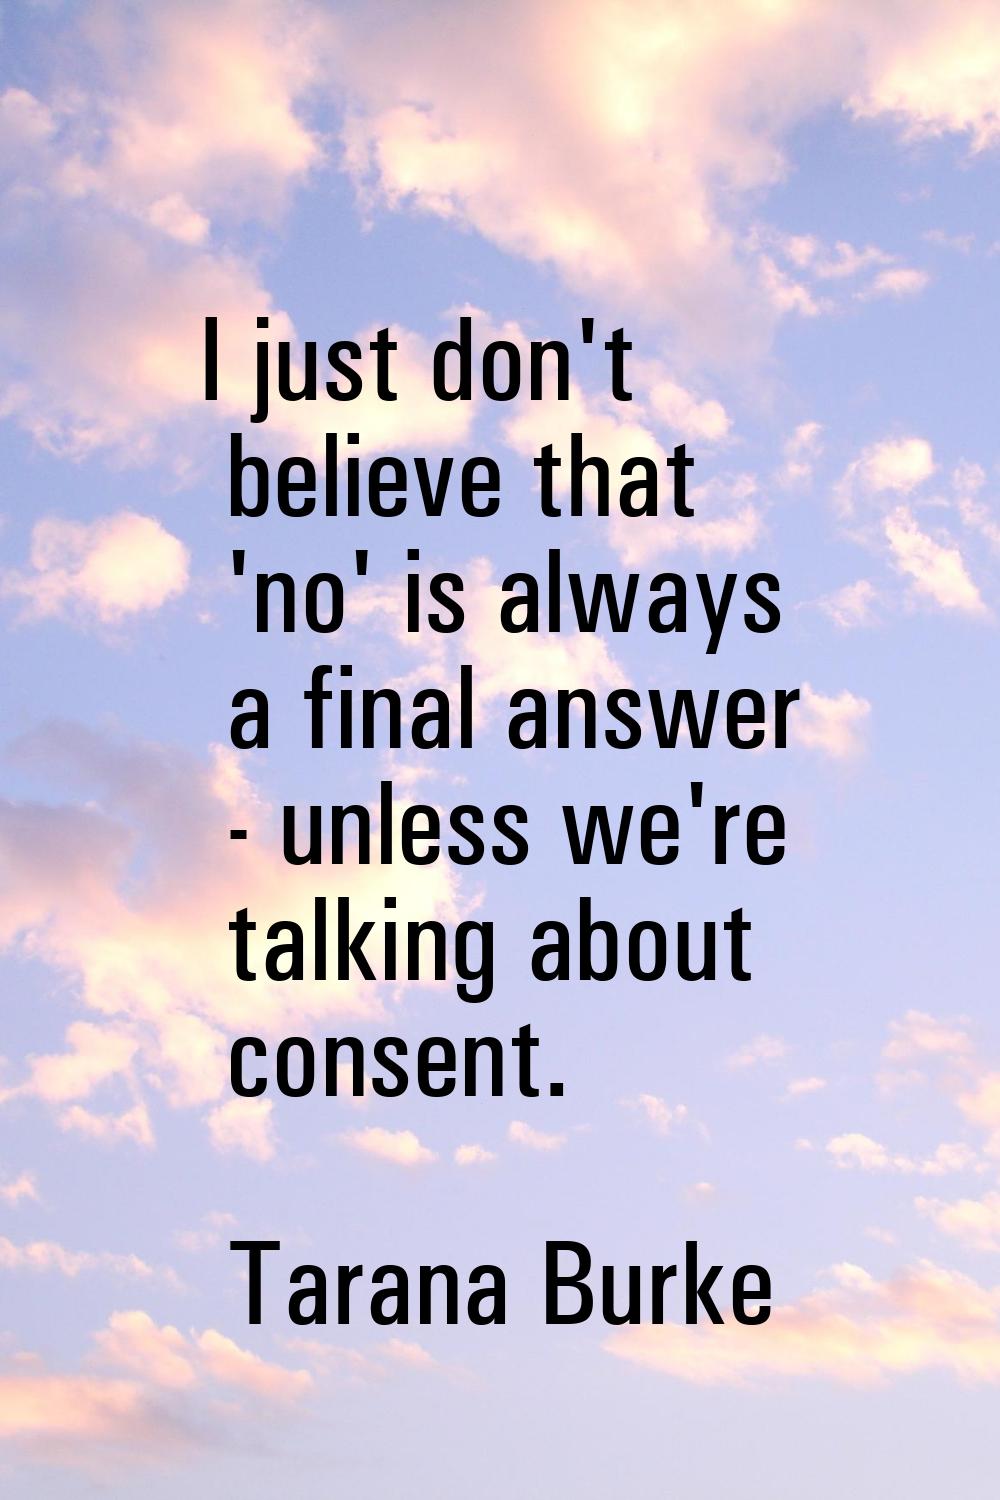 I just don't believe that 'no' is always a final answer - unless we're talking about consent.